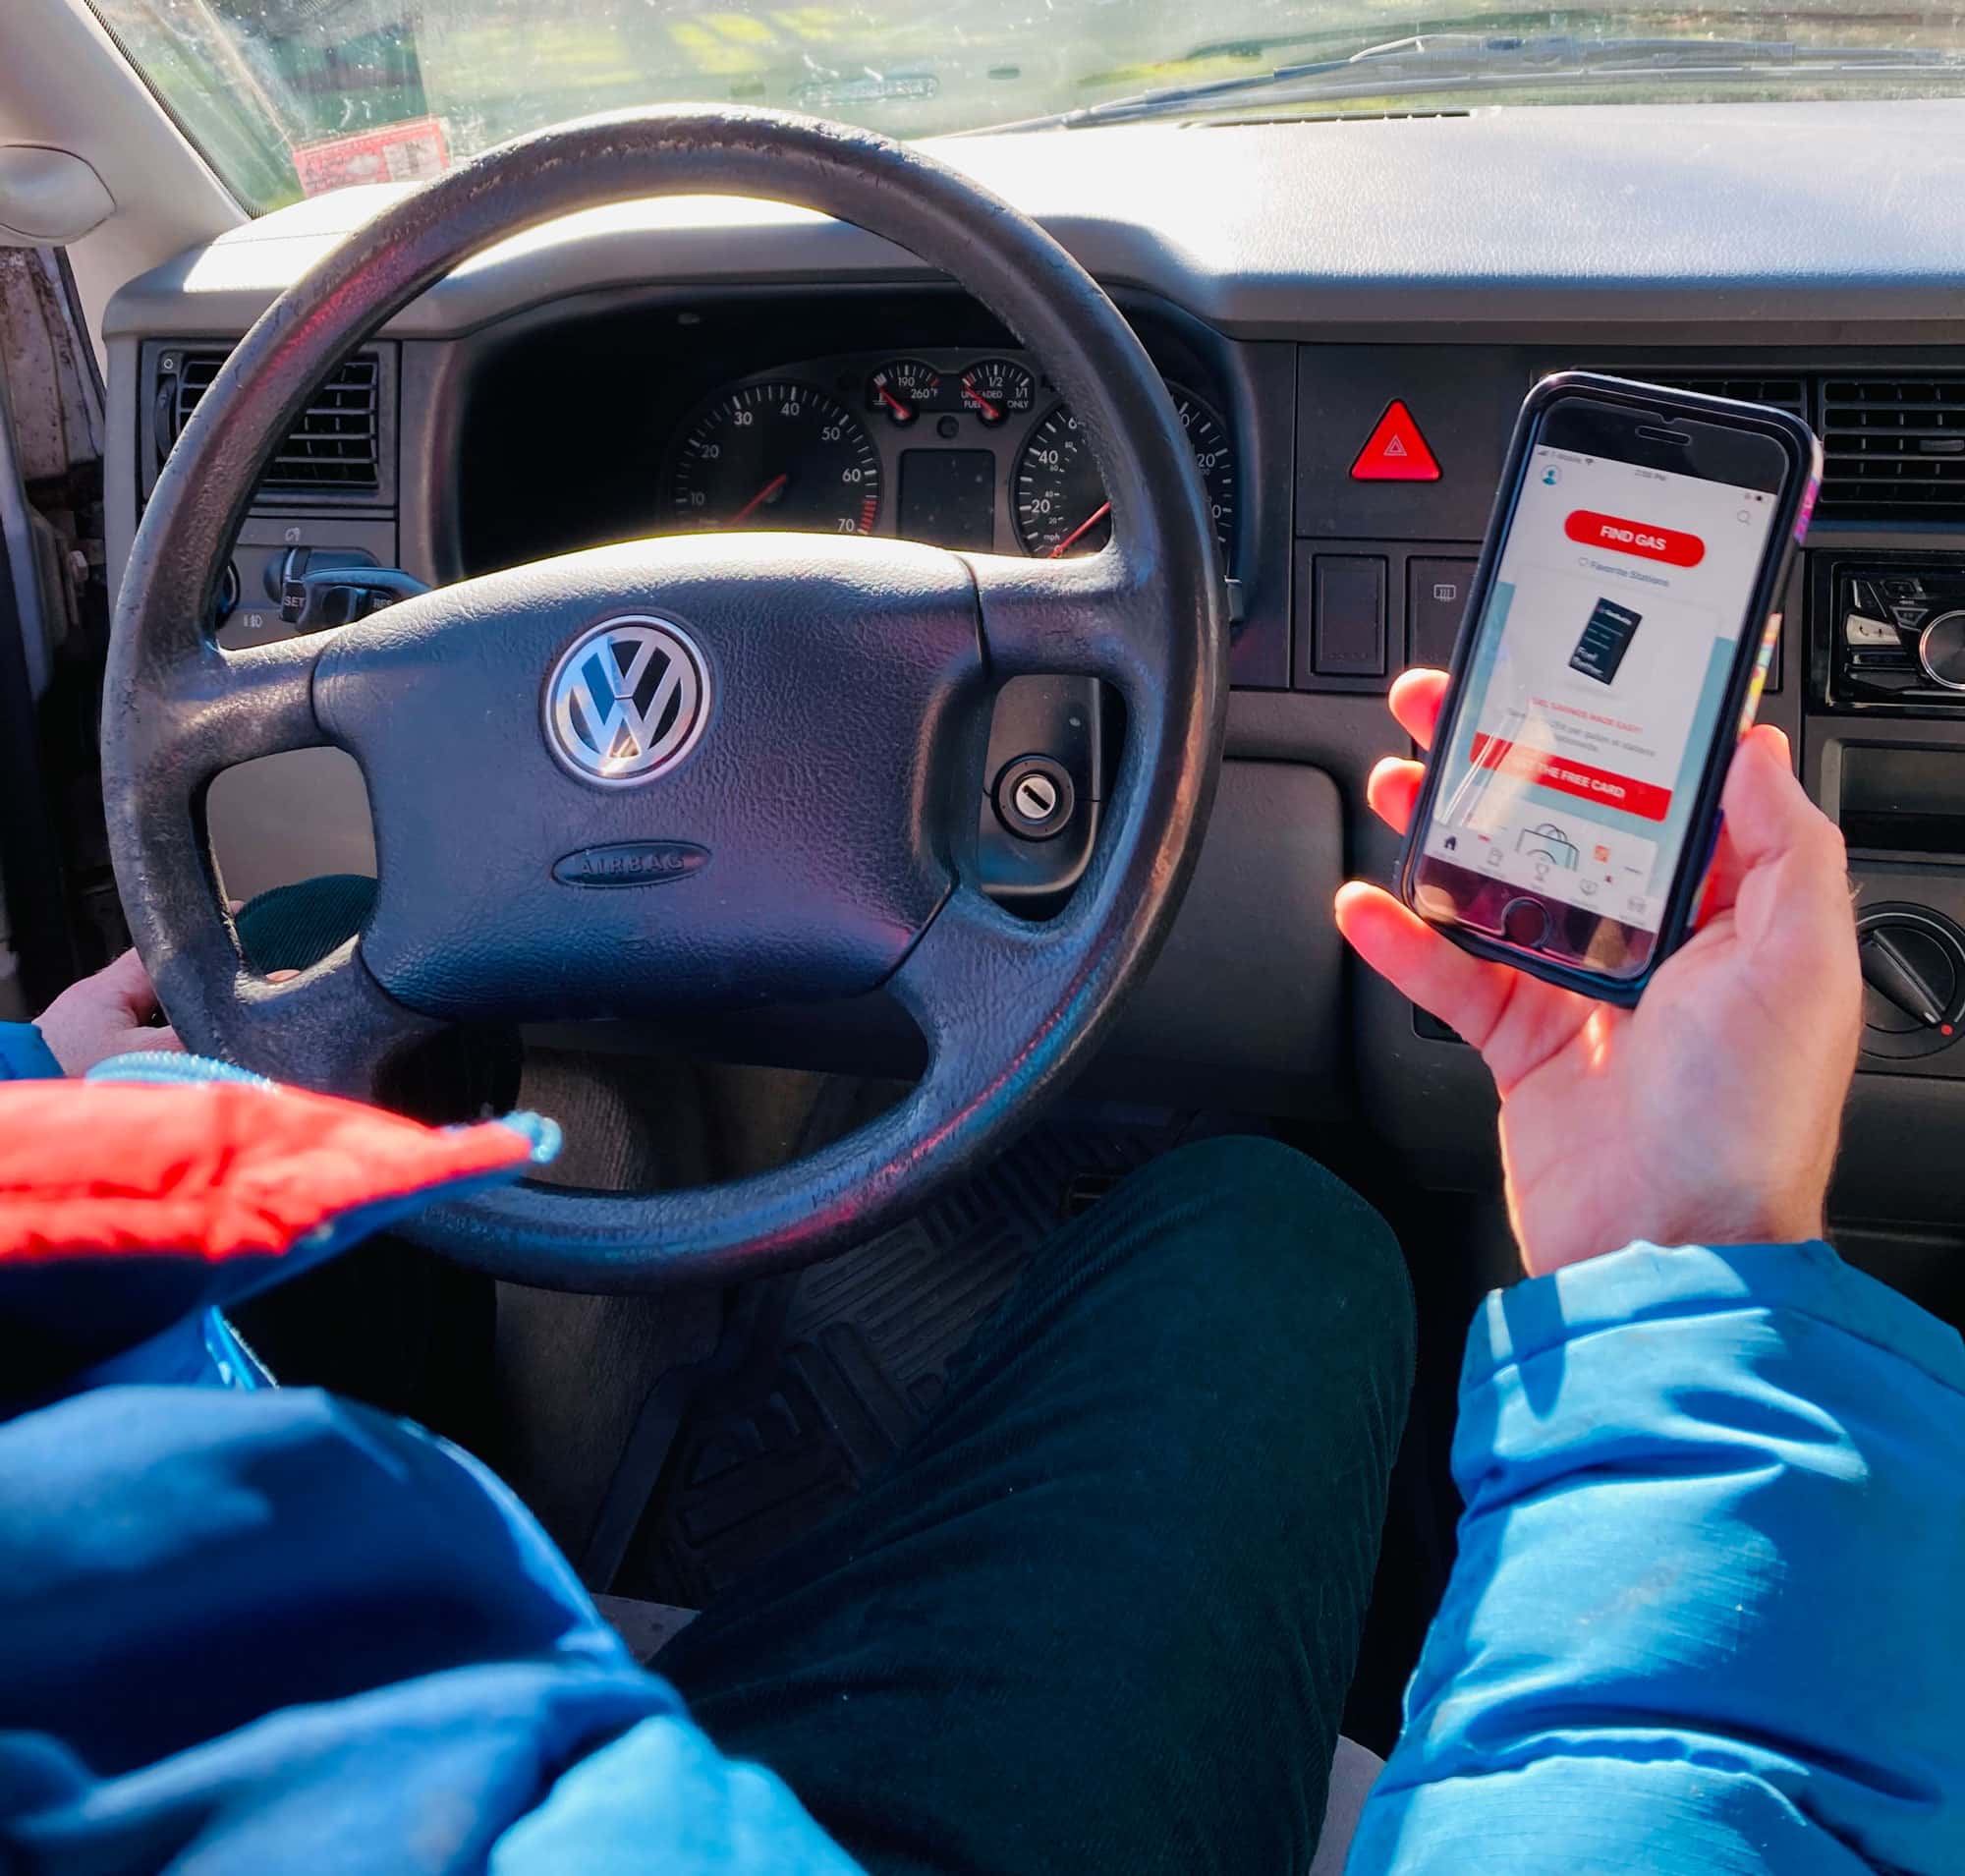 View of person in blue puffy jacket while they sit behind the wheel of a Volkswagon car and read something on their phone.